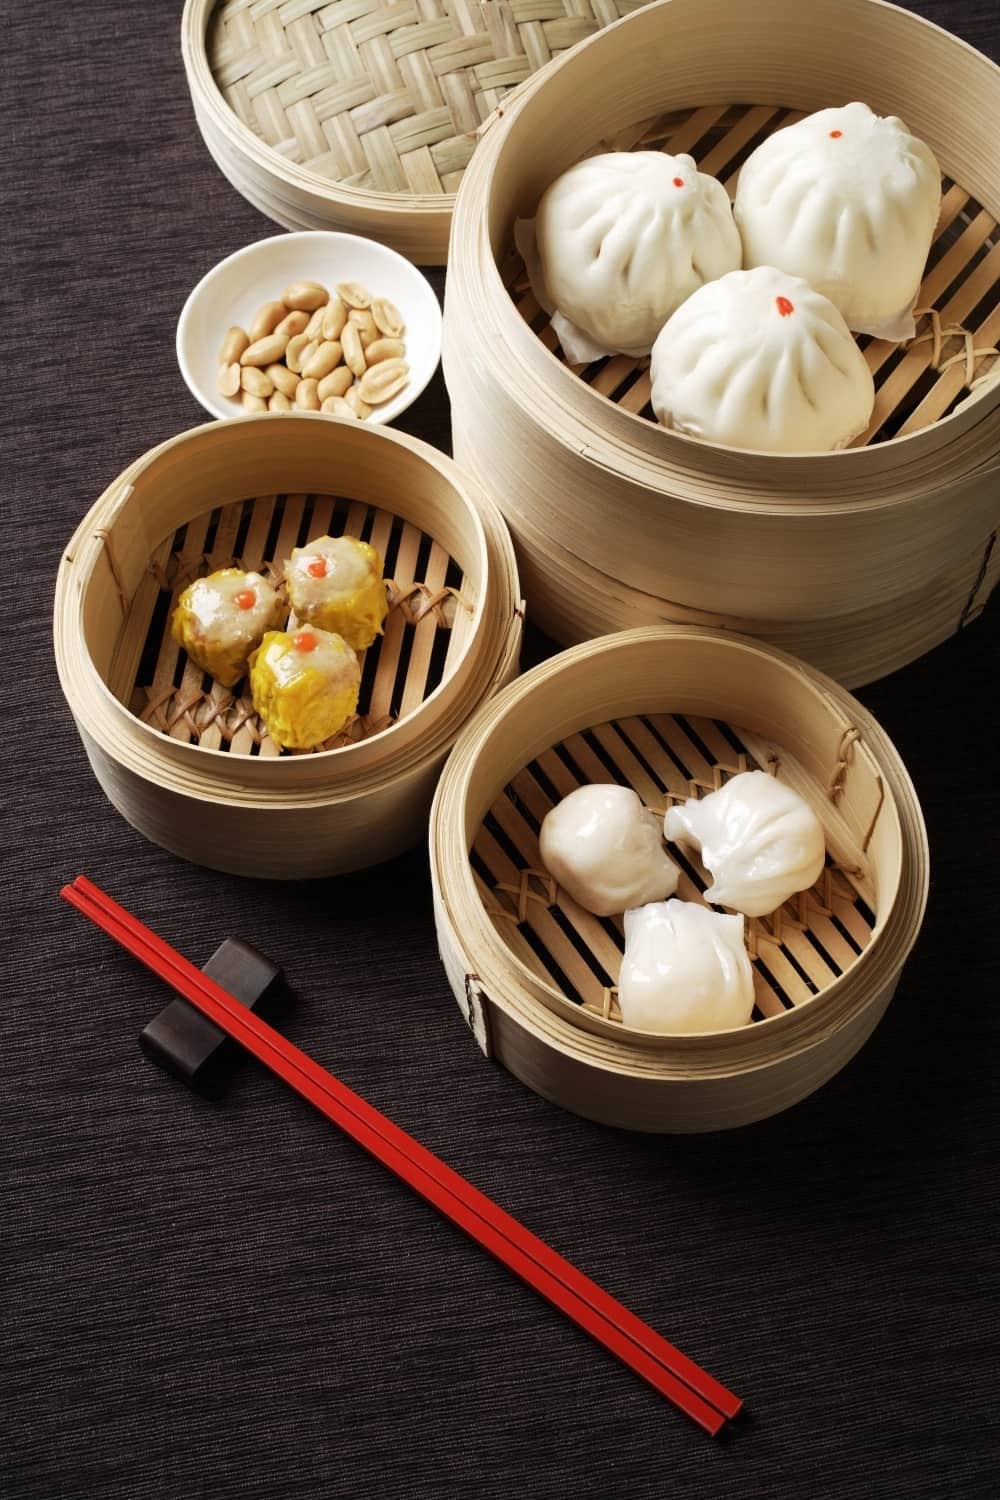 Assortment of dim sum in bamboo steamers.